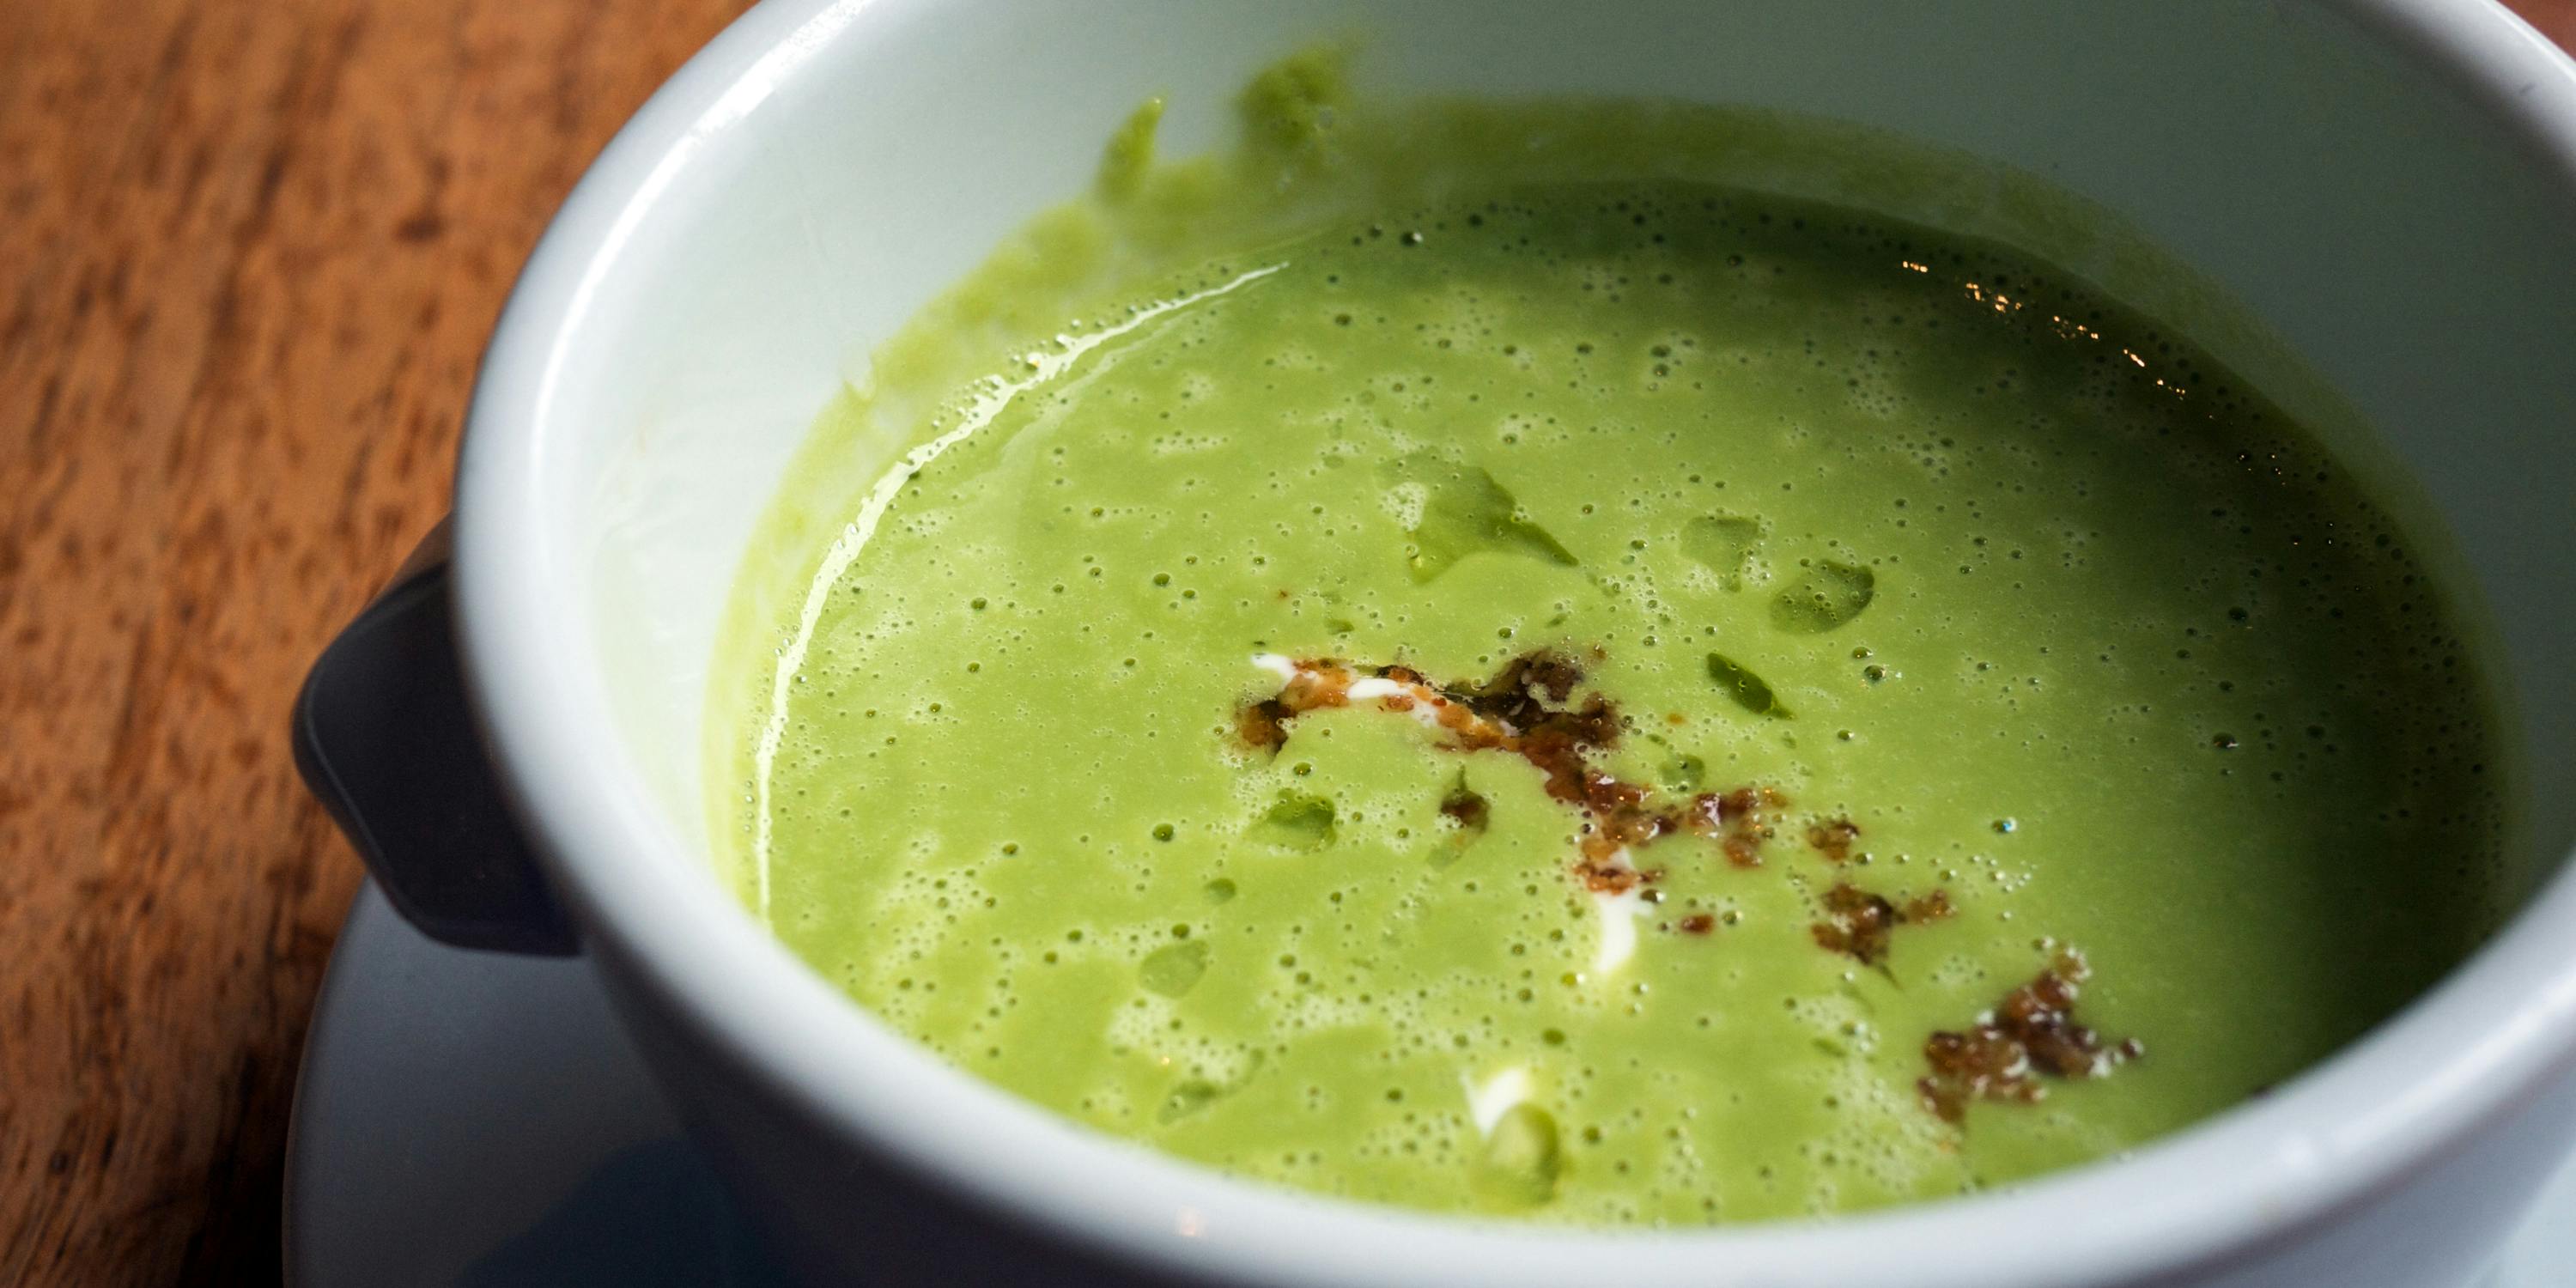 How To Make Cannabis Infused Spinach & Pea Soup | HERB Recipe